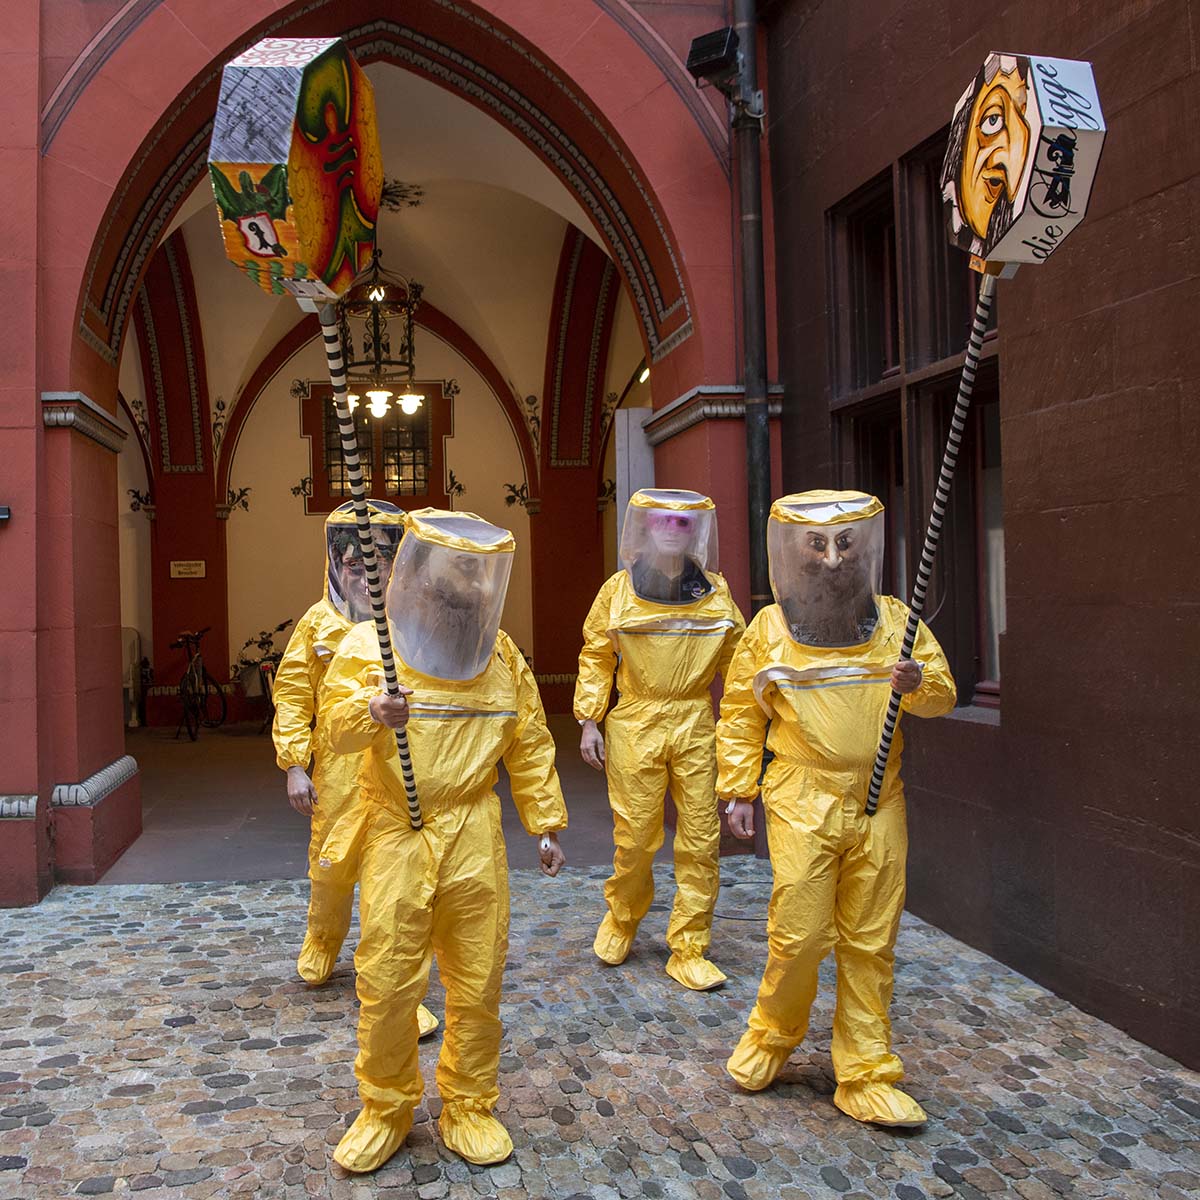 409886003 – Keystone-SDA/Georgios Kefalas -  « Fasnächtler » protest on 28 February 2020 in protective suits with their lanterns in the courtyard of the city hall in Basel. Shortly before, the government council had cancelled all events in connection with the Basel carnival.